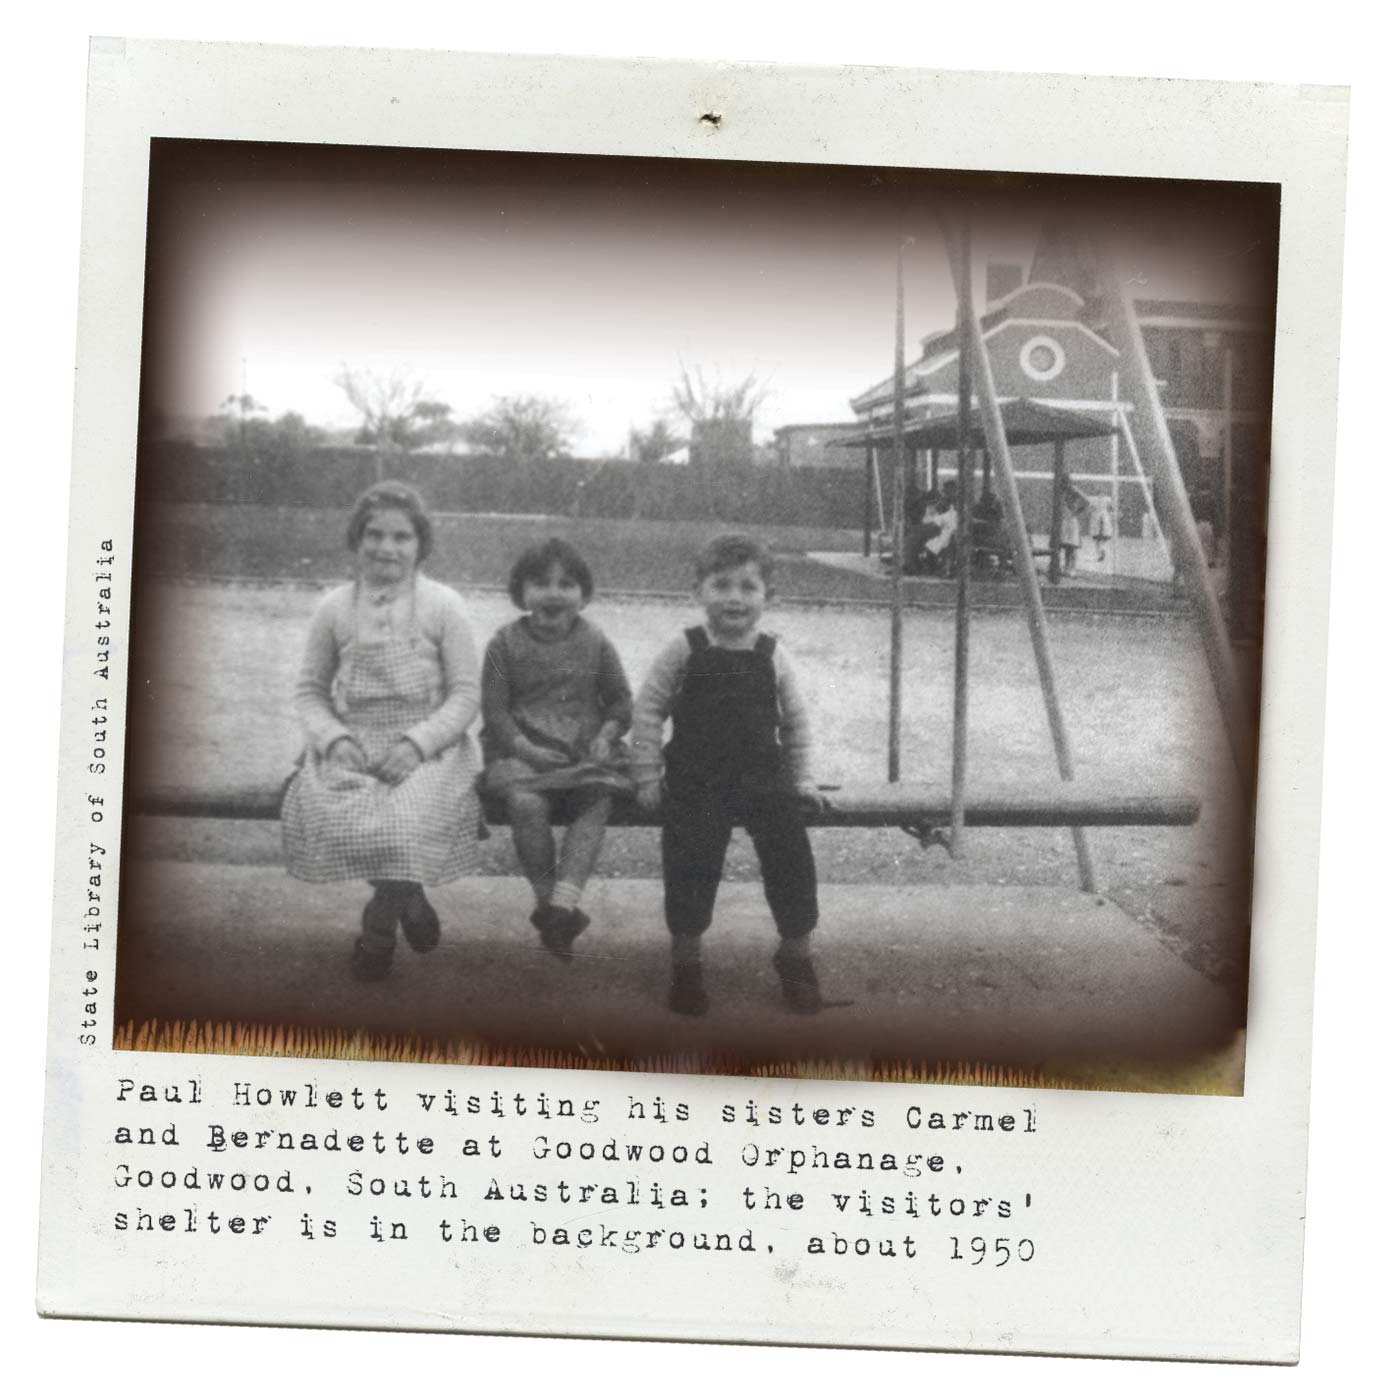 A black and white Polaroid photograph of three young children, two girls and a boy, sitting on a wooden swing. There is a building in the background and the children are smiling at the camera. Typewritten text underneath reads 'Paul Howlett visiting his sisters Carmel and Bernadette at Goodwood Orphanage, Goodwood, South Australia; the vistors' shelter is in the background, about 1950.' Smaller text, on the left-hand side of the image, in a vertical direction, reads 'State Library of South Australia'. - click to view larger image